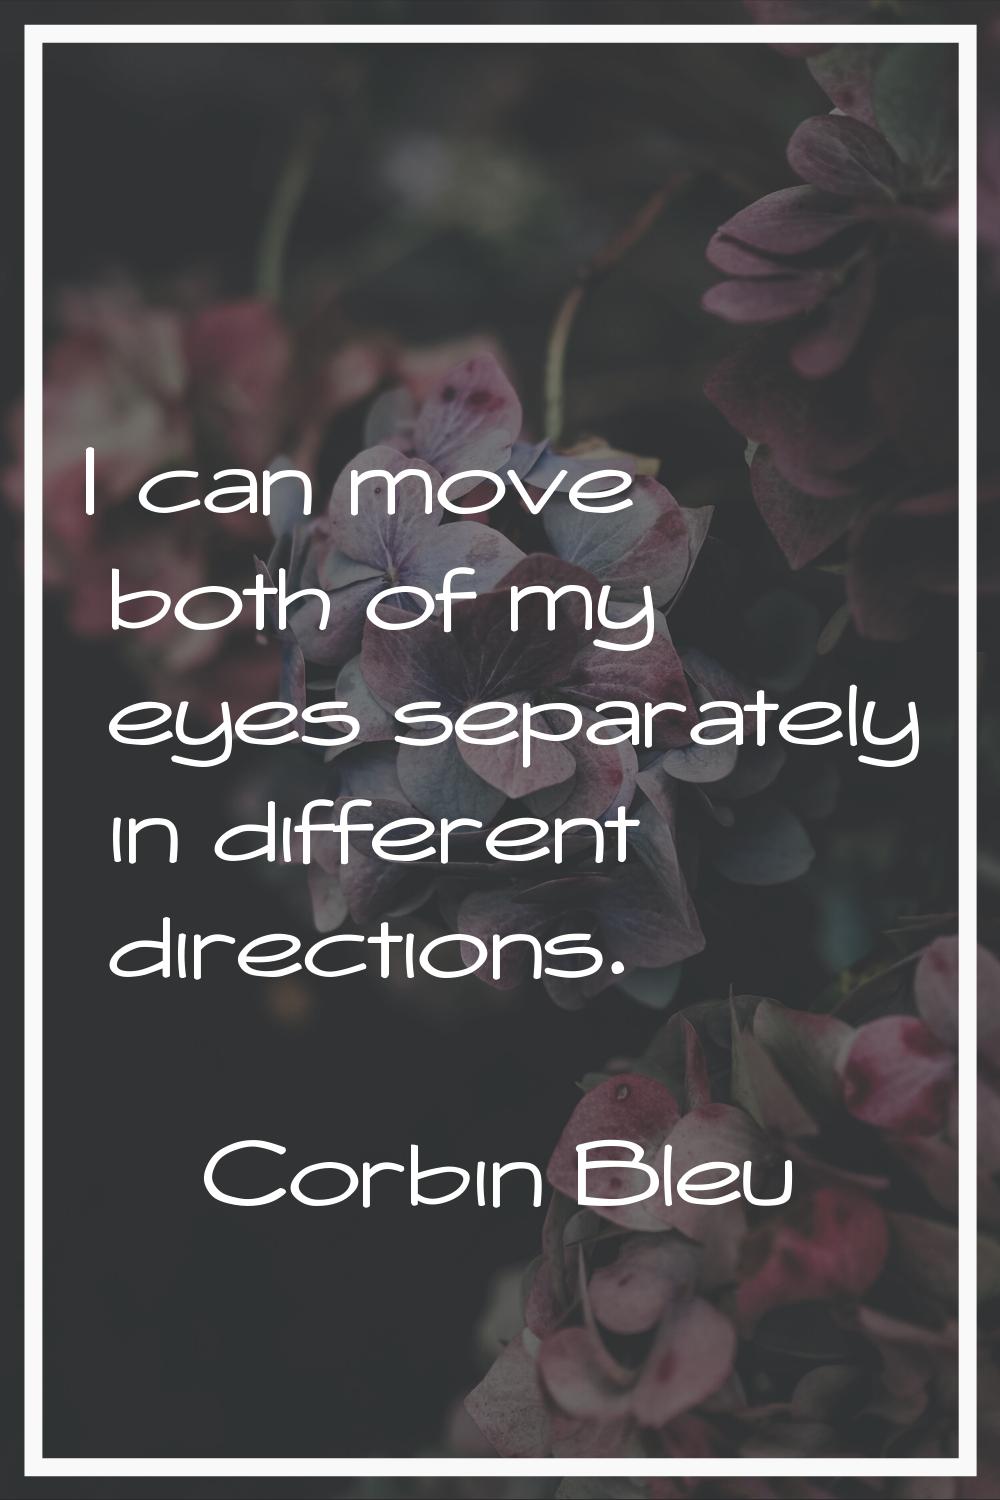 I can move both of my eyes separately in different directions.